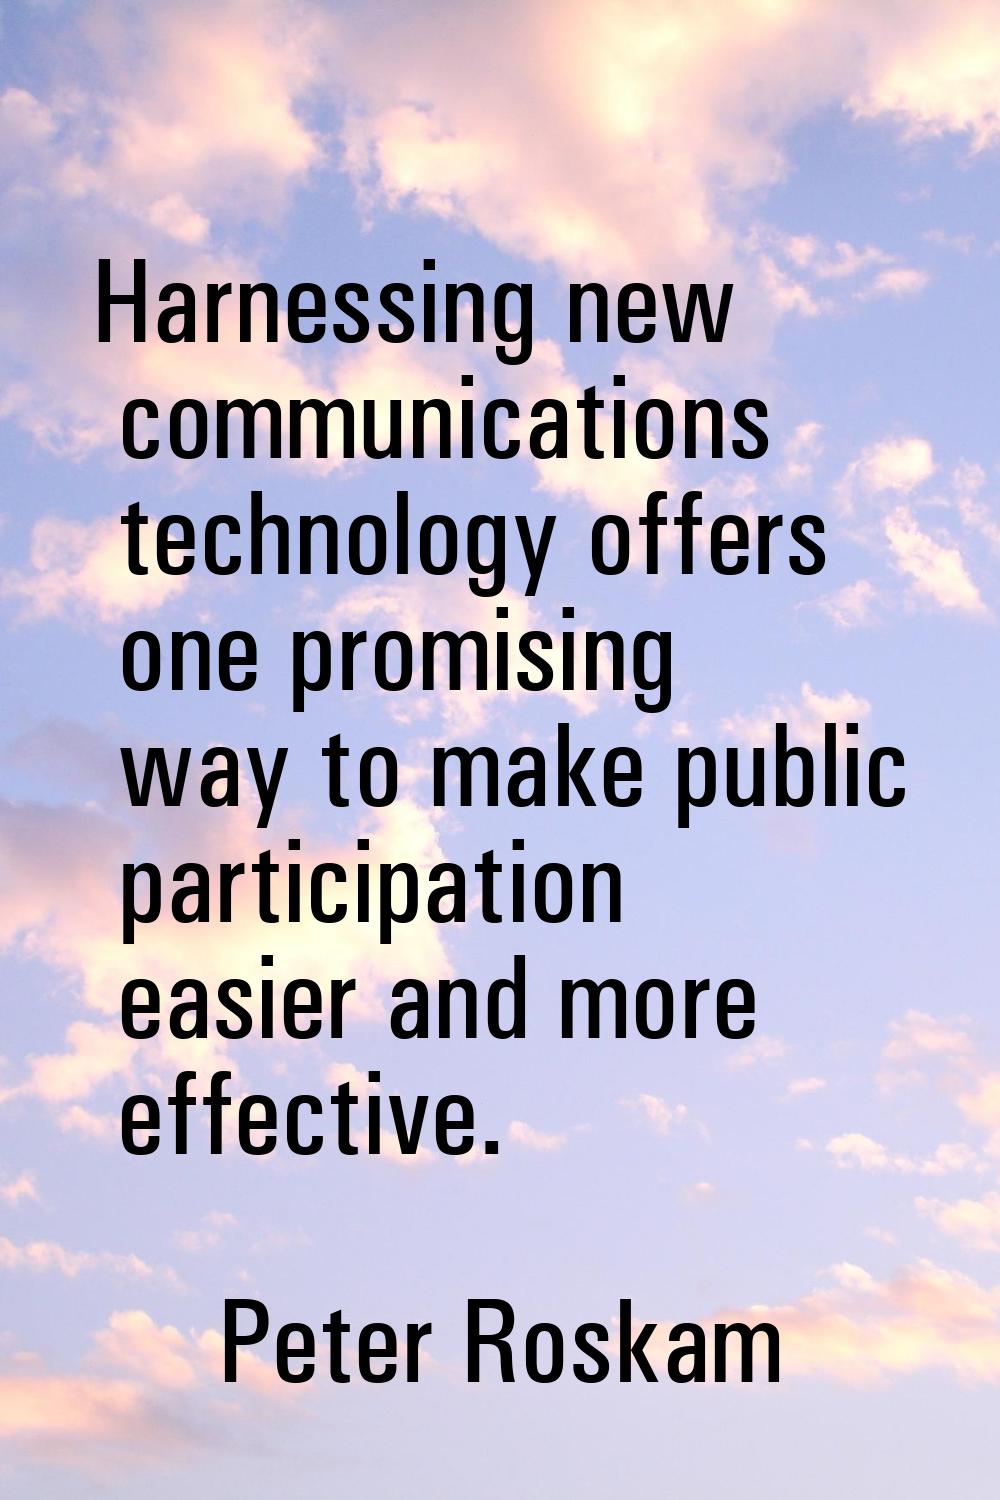 Harnessing new communications technology offers one promising way to make public participation easi